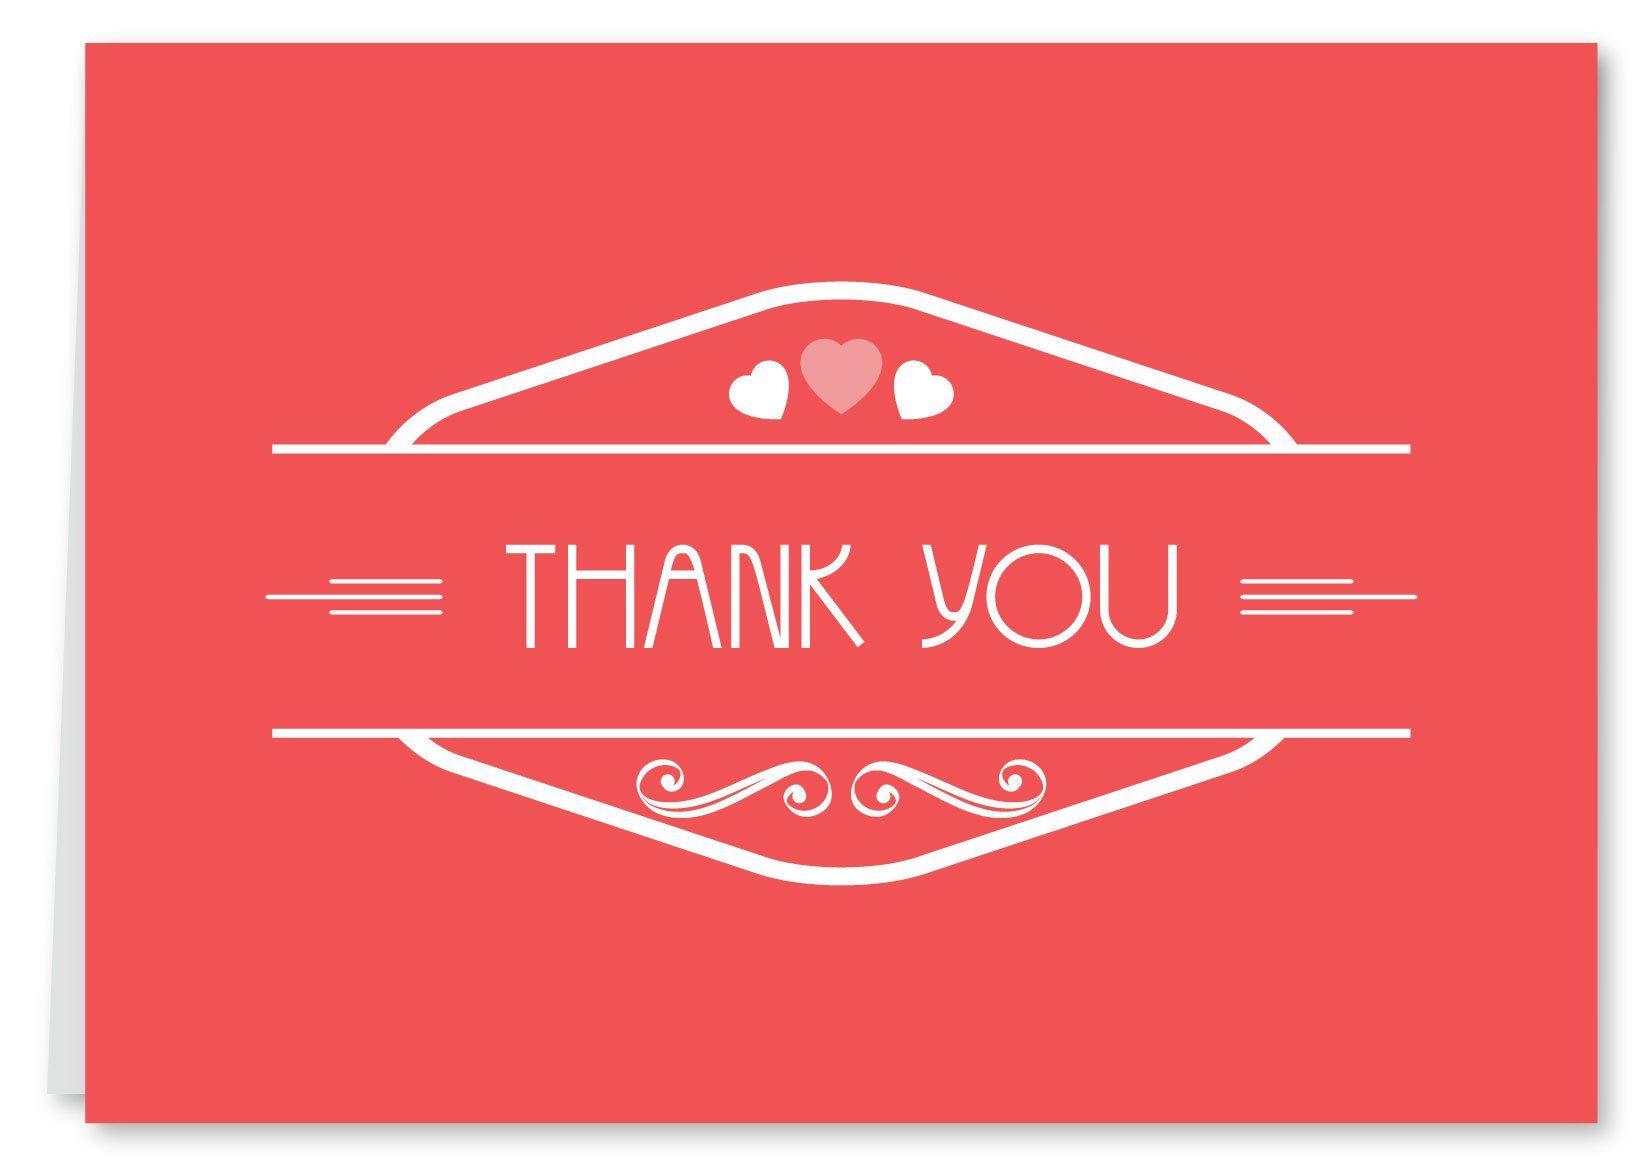 Thank You Red Logo - Thank You Cards & Vouchers : Buy Thank You Vouchers & Cards Online